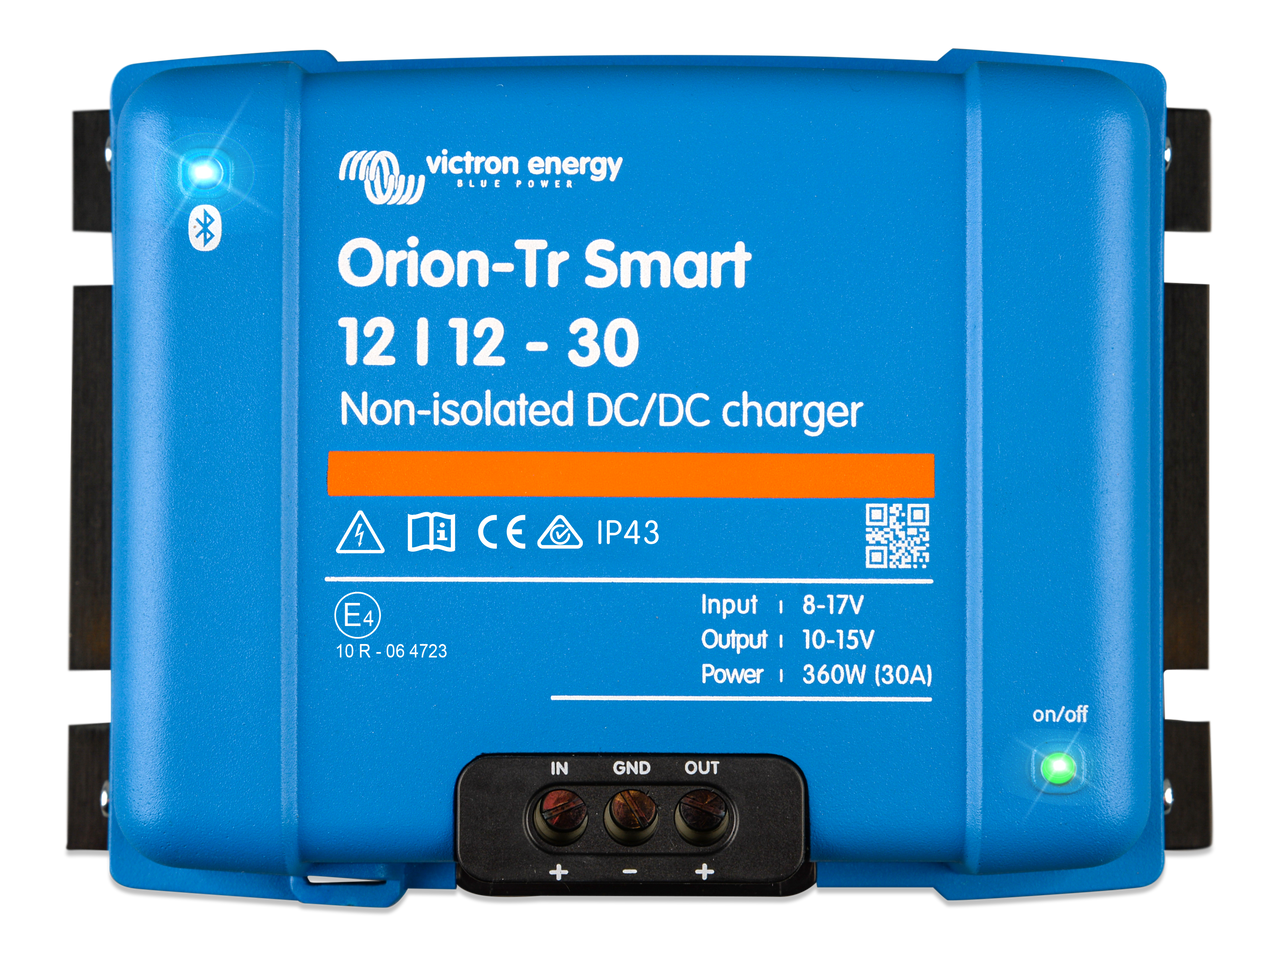 Victron Energy - Orion-TR Smart DC-DC non-isolated